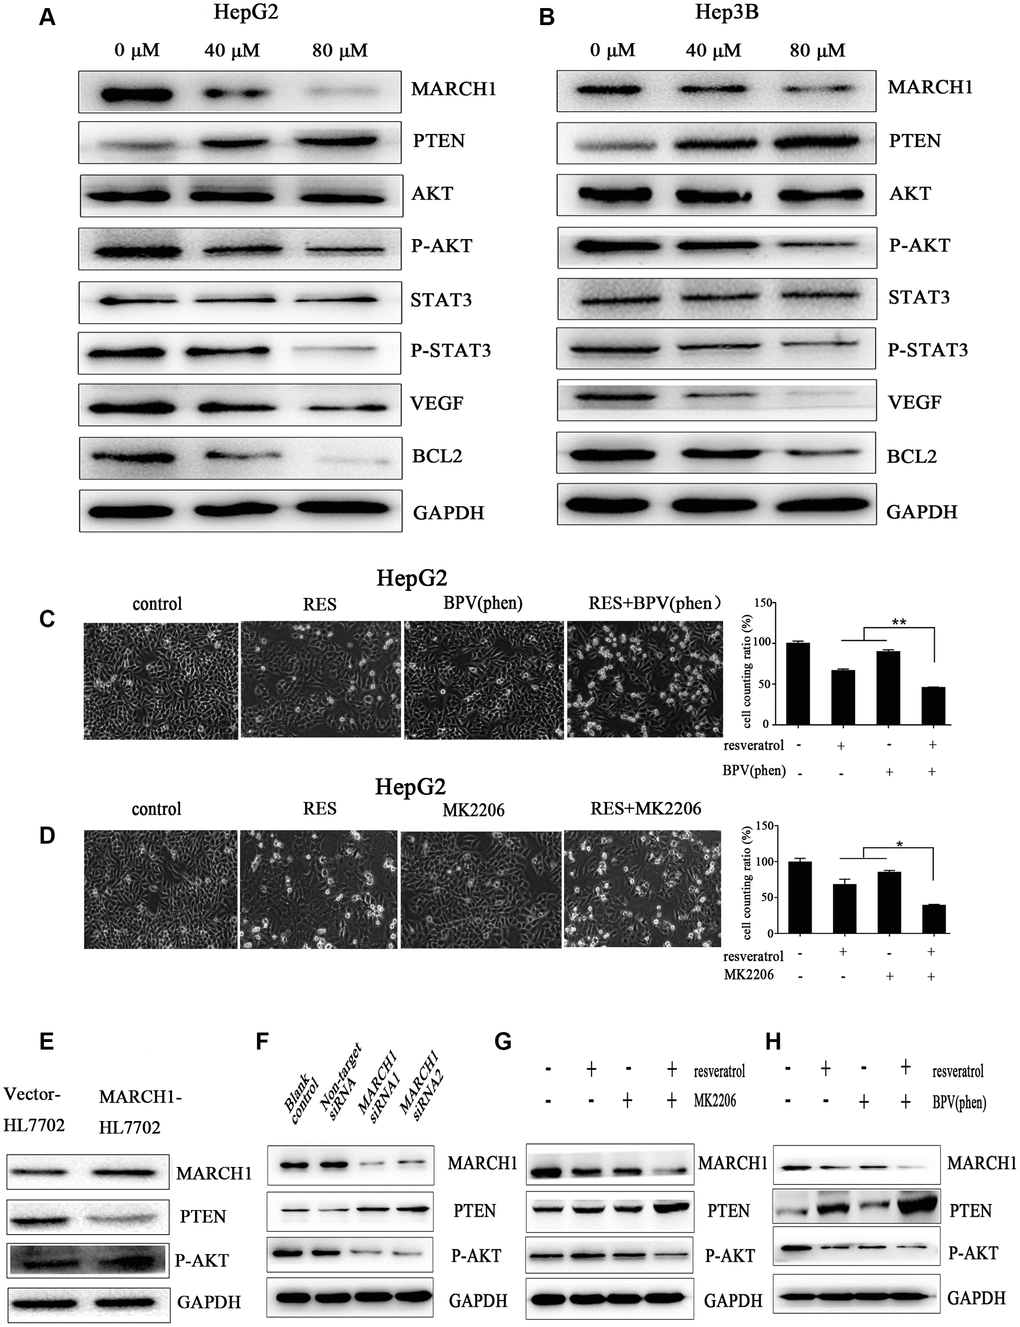 Resveratrol could down-regulate MARCH1 expression via PTEN–STAT3 signaling. (A, B) HepG2 and Hep3B cells were treated with different concentrations of resveratrol for 48 h, and the level of protein expression was analyzed by western blotting. MARCH1 and p-AKT levels significantly drastically decreased, PTEN levels increased, and downstream protein molecules also significantly decreased. (C, D) HepG2 cells were treated with inhibitors MK2206 and BPV(phen). The combination of resveratrol and inhibitors significantly inhibited cell survival compared to resveratrol alone. (E) Overexpression of the MARCH1 protein with empty vectors and overexpression plasmids in the human HL7702 cells. (F) HepG2 cells were infected with indicated concentrations of siRNA for 72 h. MARCH1 expression significantly decreased, while PTEN expression increased. (G, H) HepG2 cells were pretreated with an inhibitor for 12 h and then combined with resveratrol for 48 h. MARCH1 expression decreased even more compared to resveratrol alone. GAPDH was also detected as a loading control.